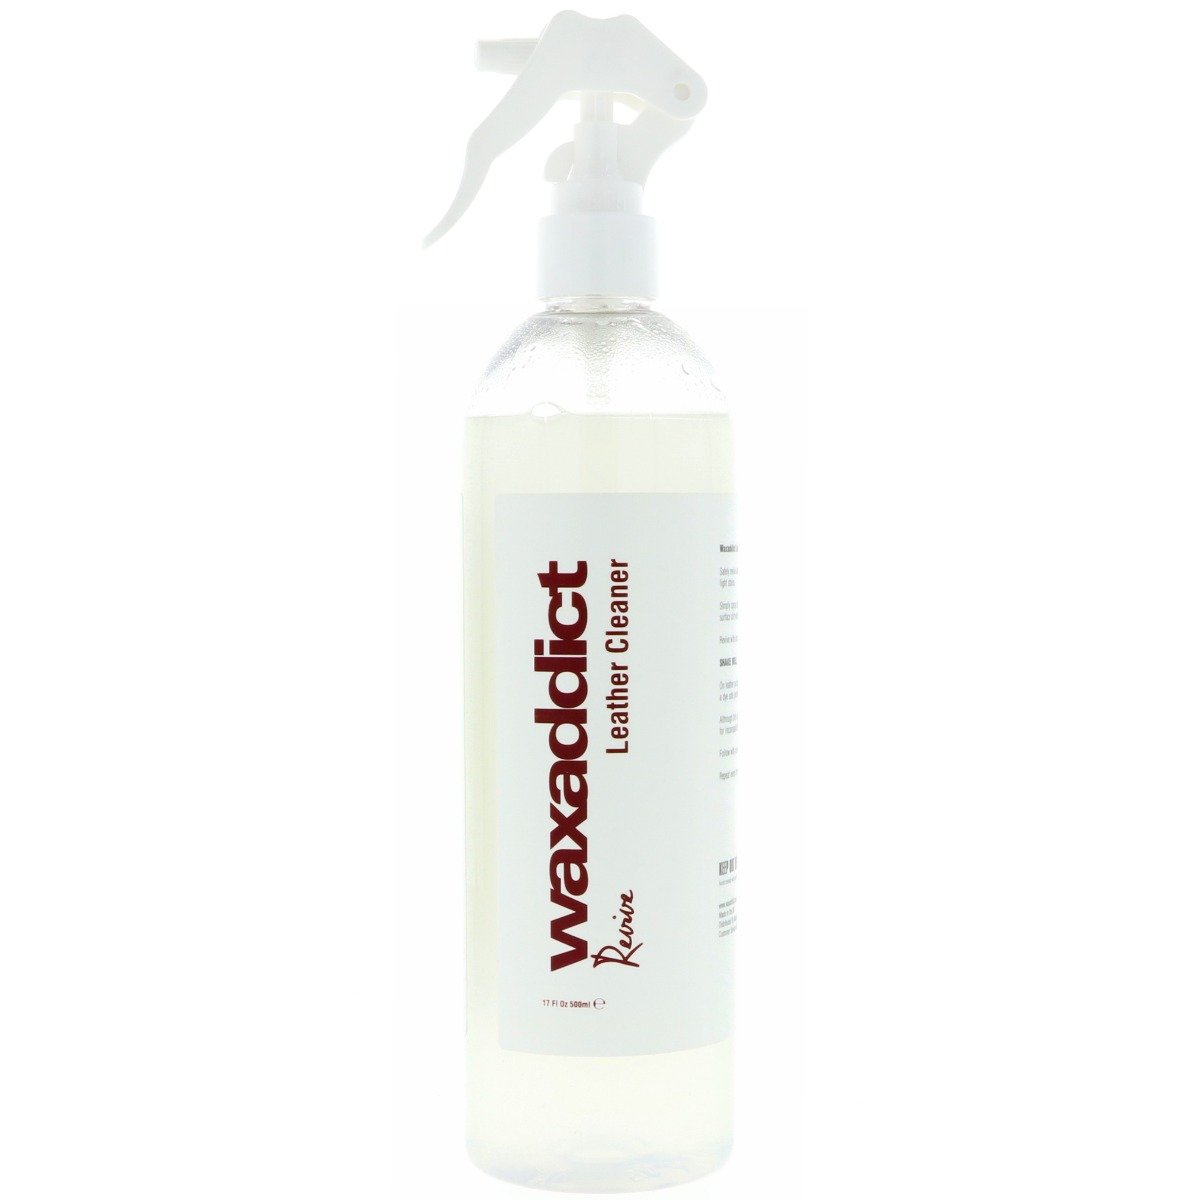 Leather Cleaner - 500ml